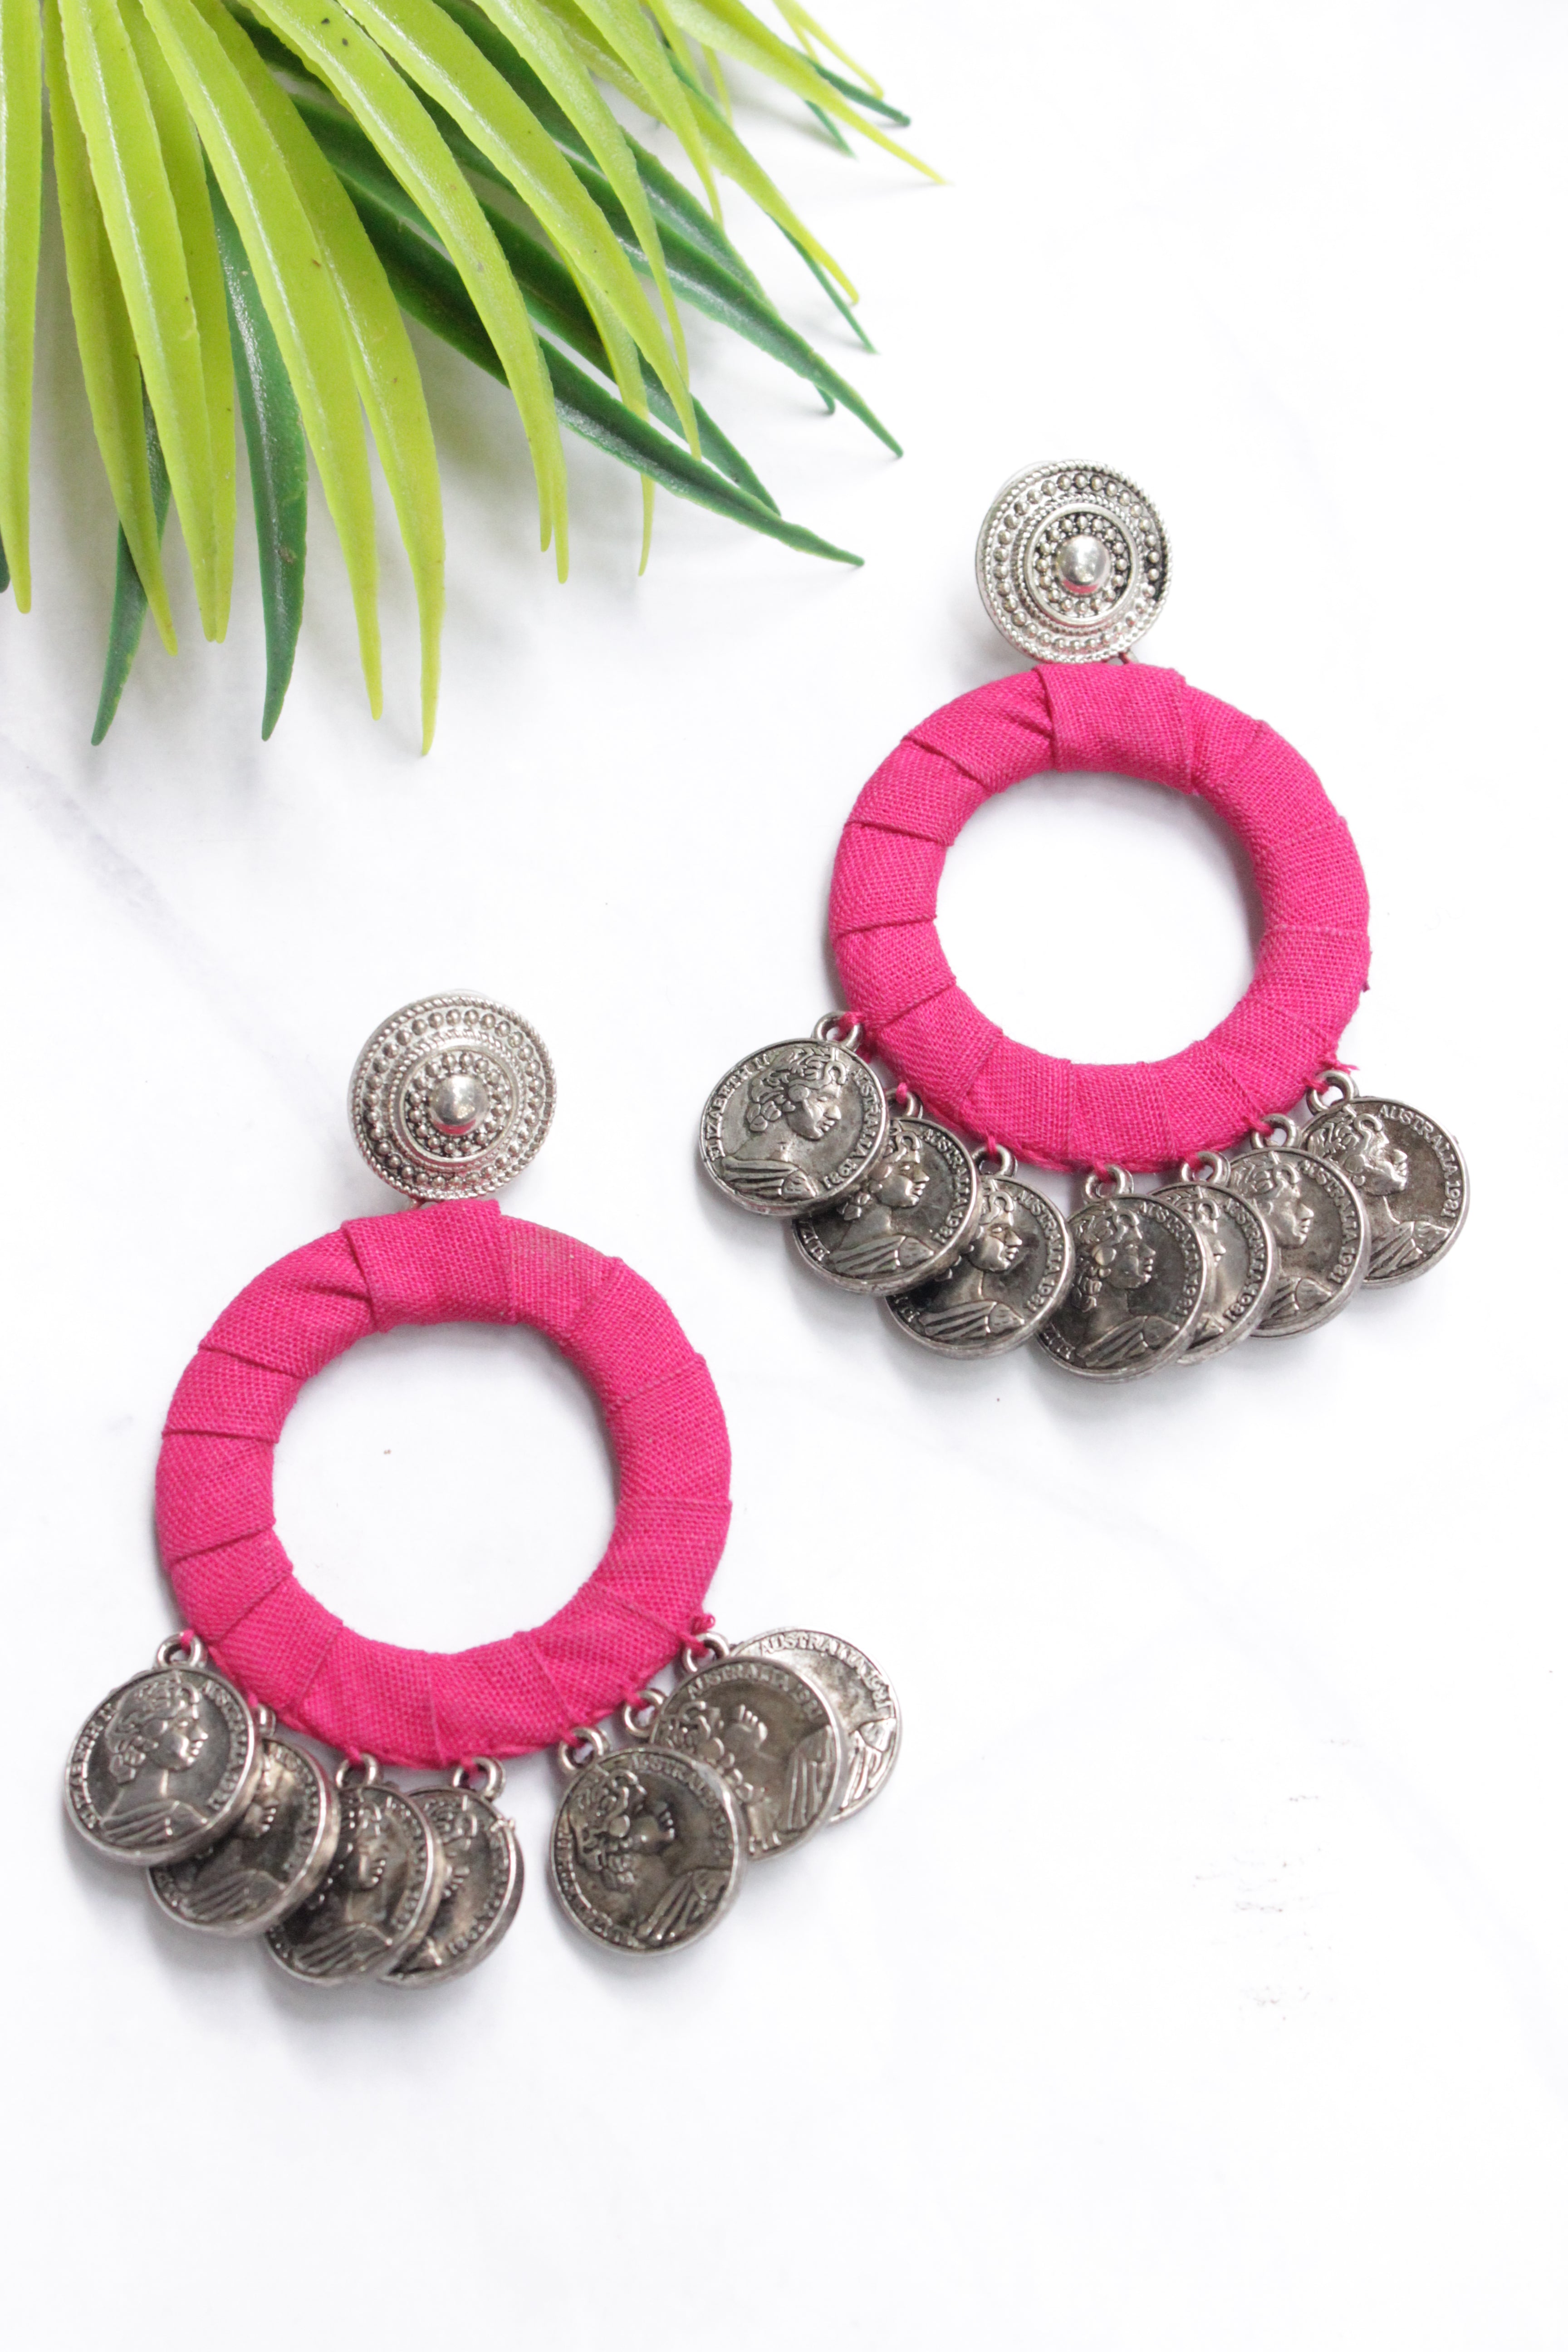 Stamped Metal Charms Embellished Fuchsia Fabric Earrings